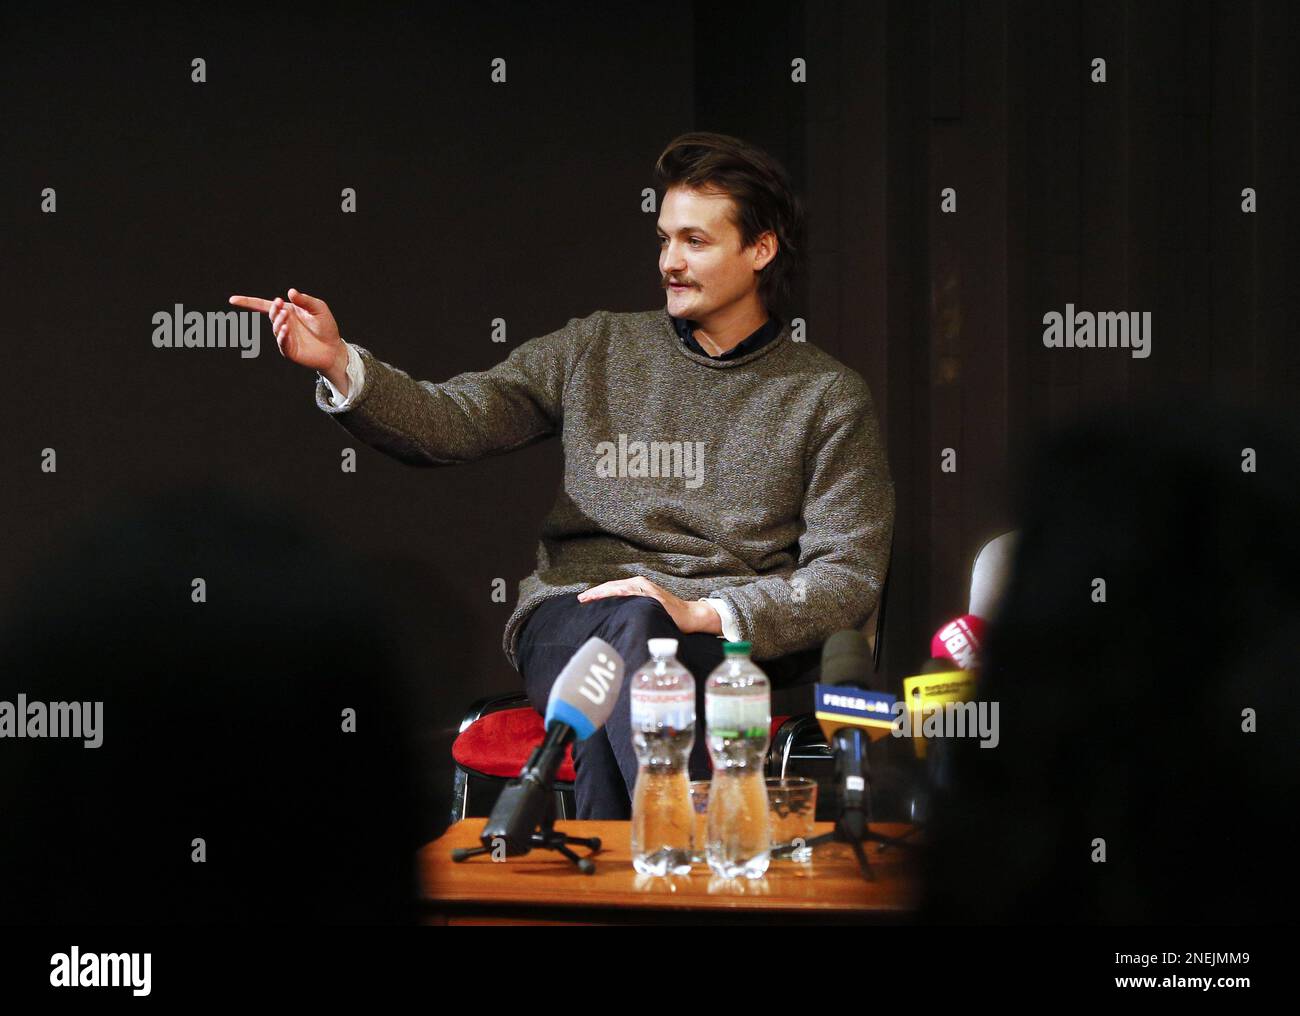 Kyiv, Ukraine 16 February 2023, Actor Jack Gleeson attends a meeting with Ukrainian actors at the Kyiv Academic Theater of Young Spectators in Kyiv, Ukraine 16 February 2023, amid Russia's invasion of Ukraine. Irish actor Jack Gleeson, best known for his role as King Joffrey Baratheon in the TV HBO series ''Game of Thrones'', came to Ukraine for several days to meet with fans and support the Ukrainian military, according to media. He along with his friends, brought a pickup truck, which was purchased by British volunteers for the Armed Forces of Ukraine, according to media. The actor will take Stock Photo